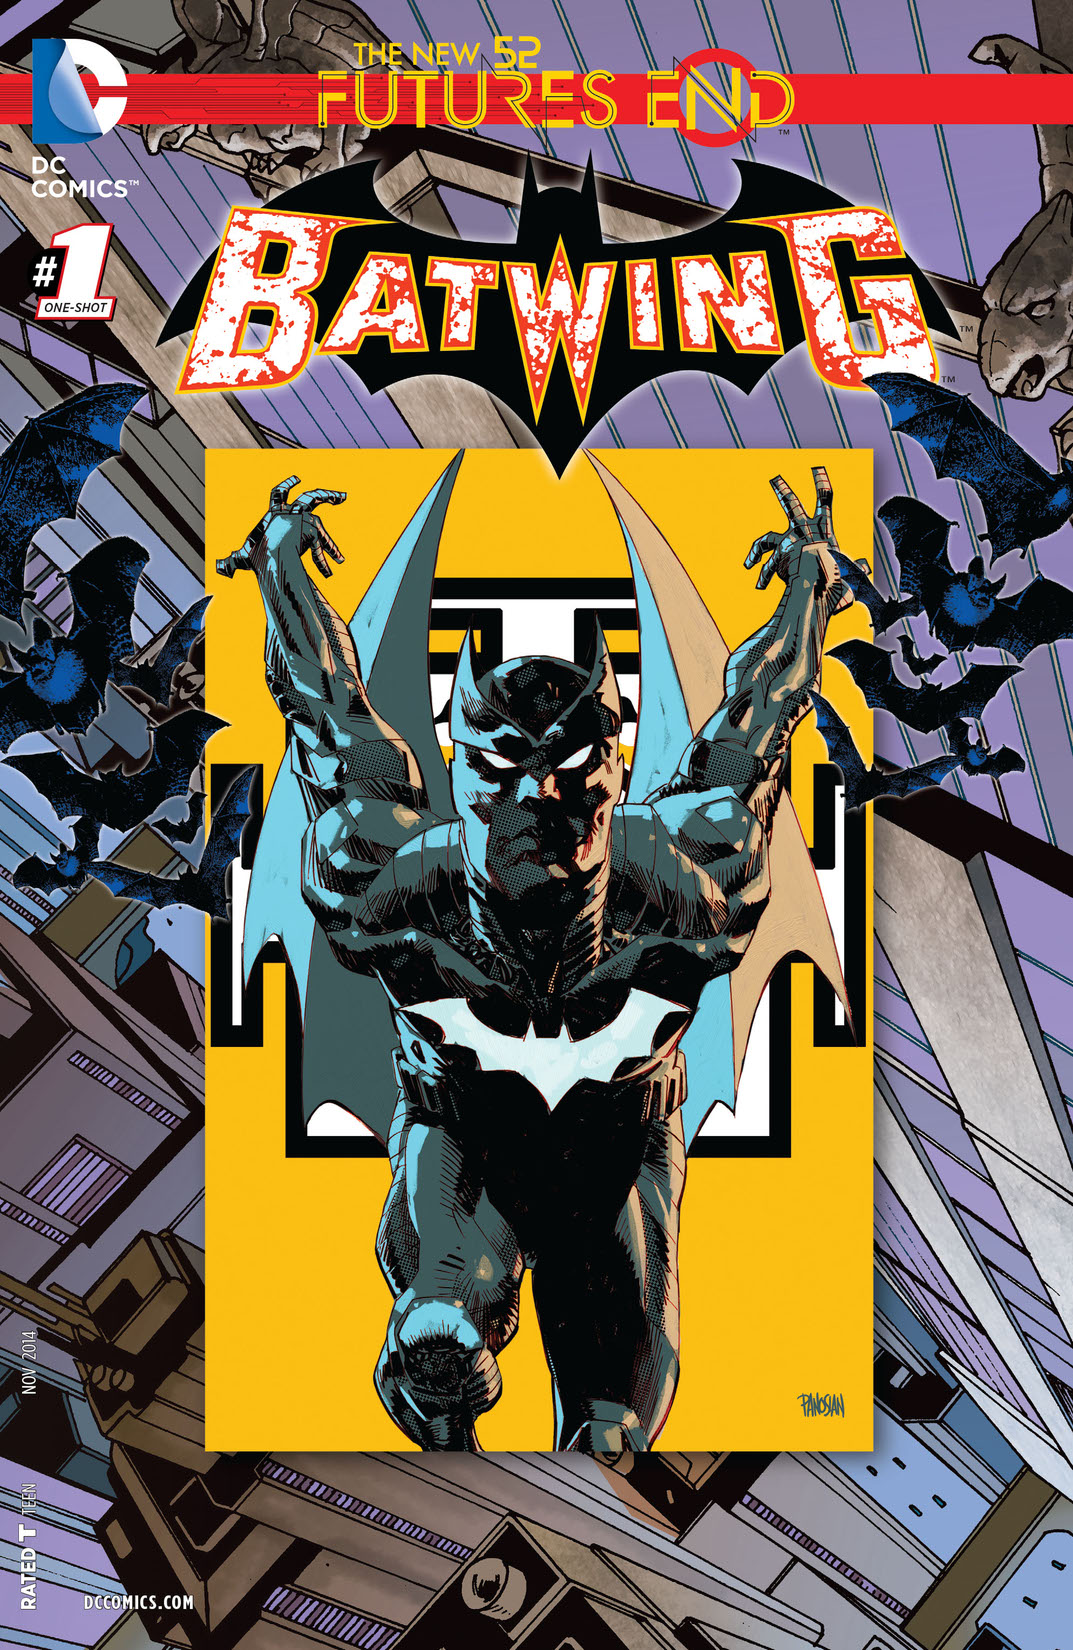 Batwing: Futures End #1 preview images